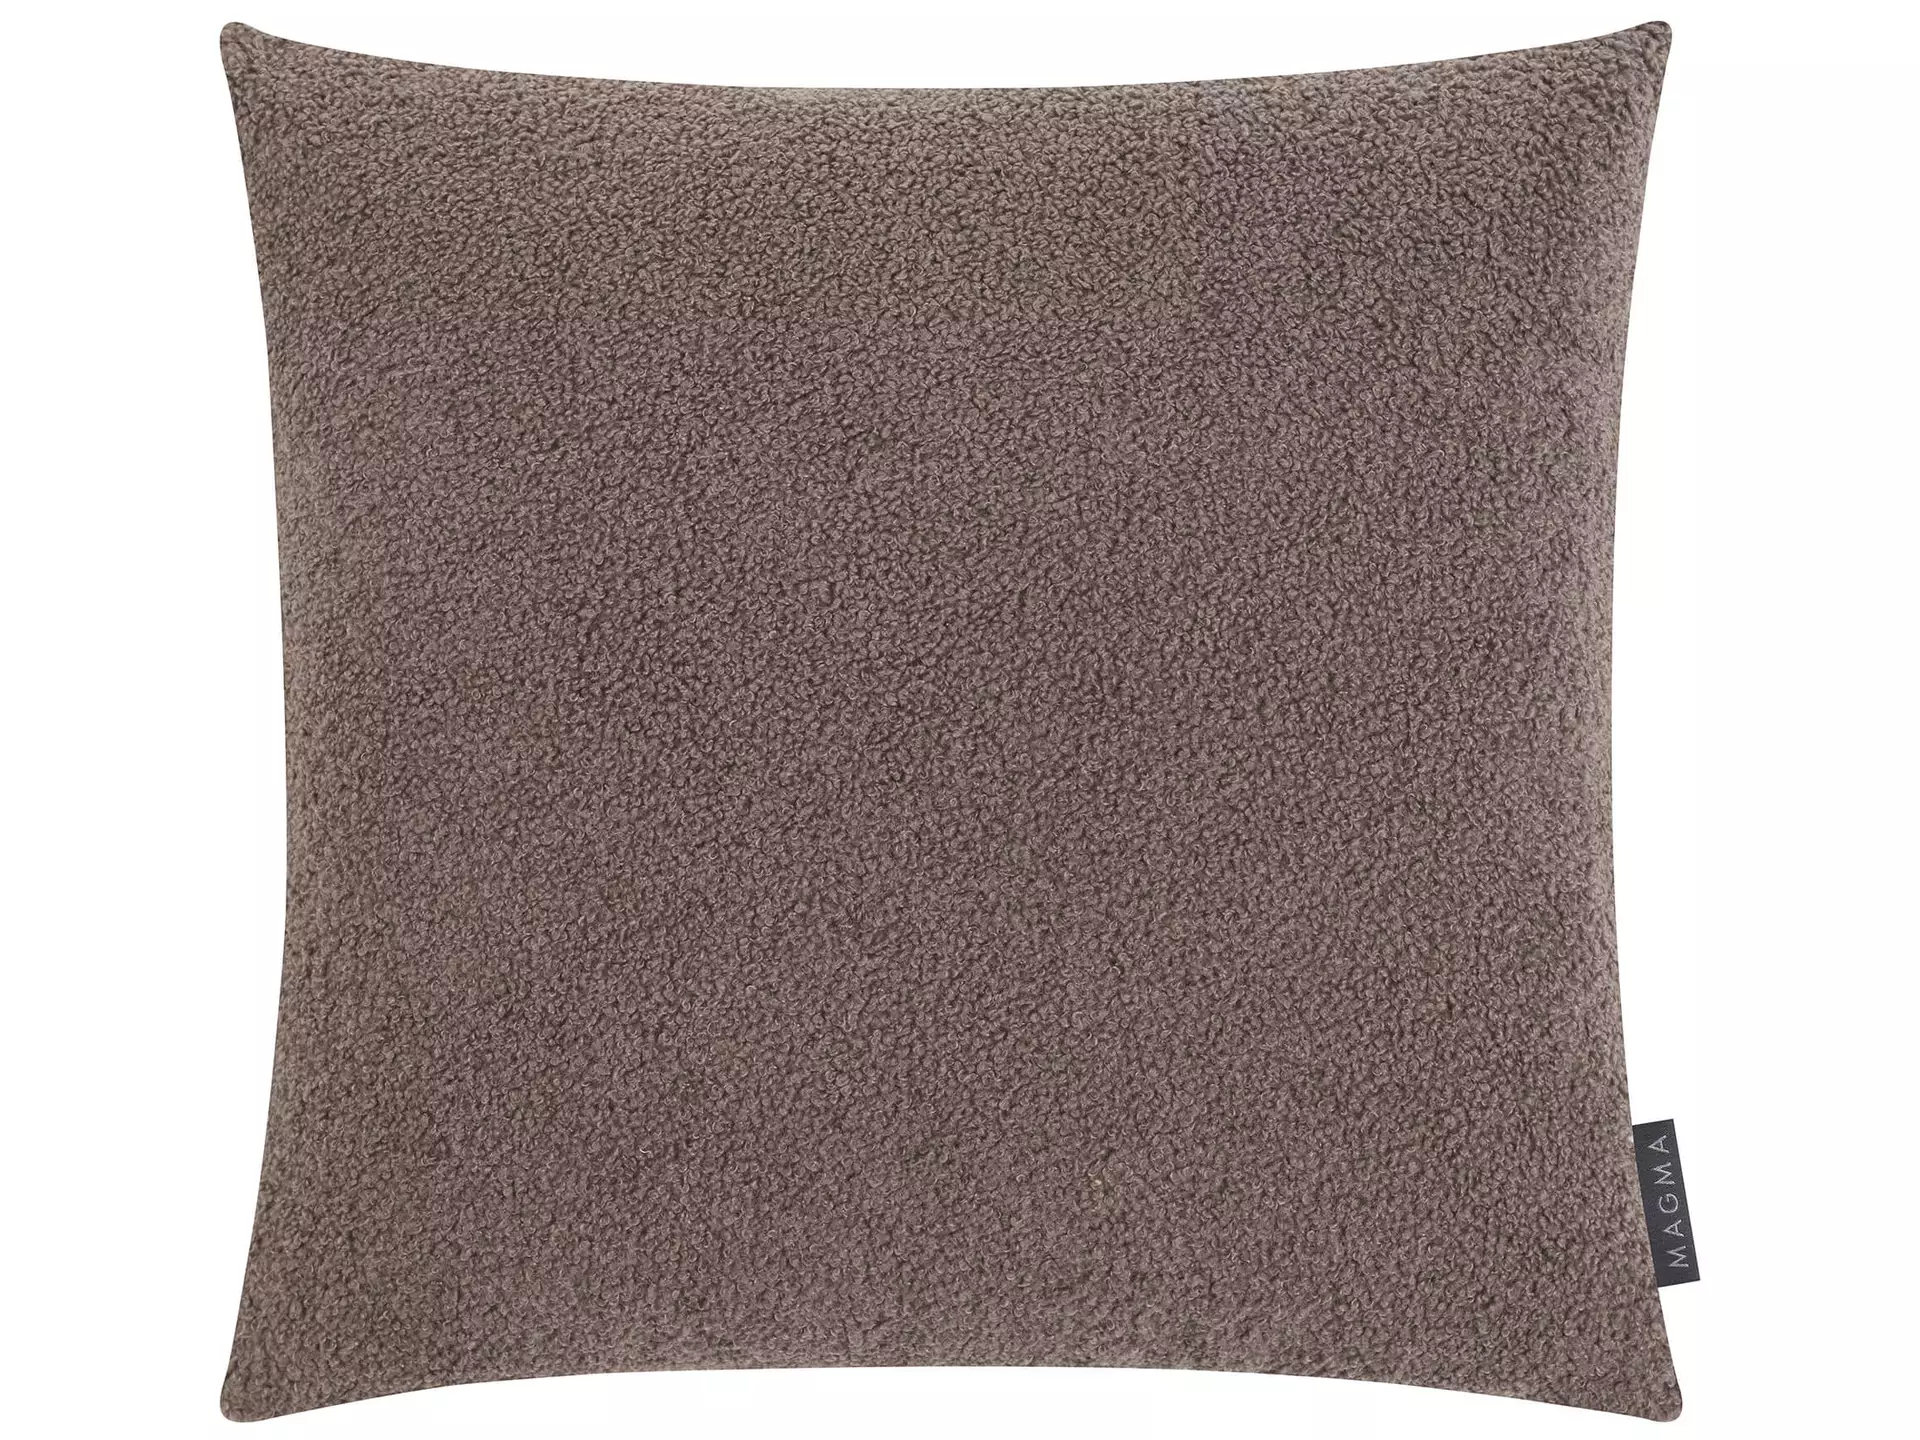 Kissenhülle Woolly Taupe 45x45 cm Magma